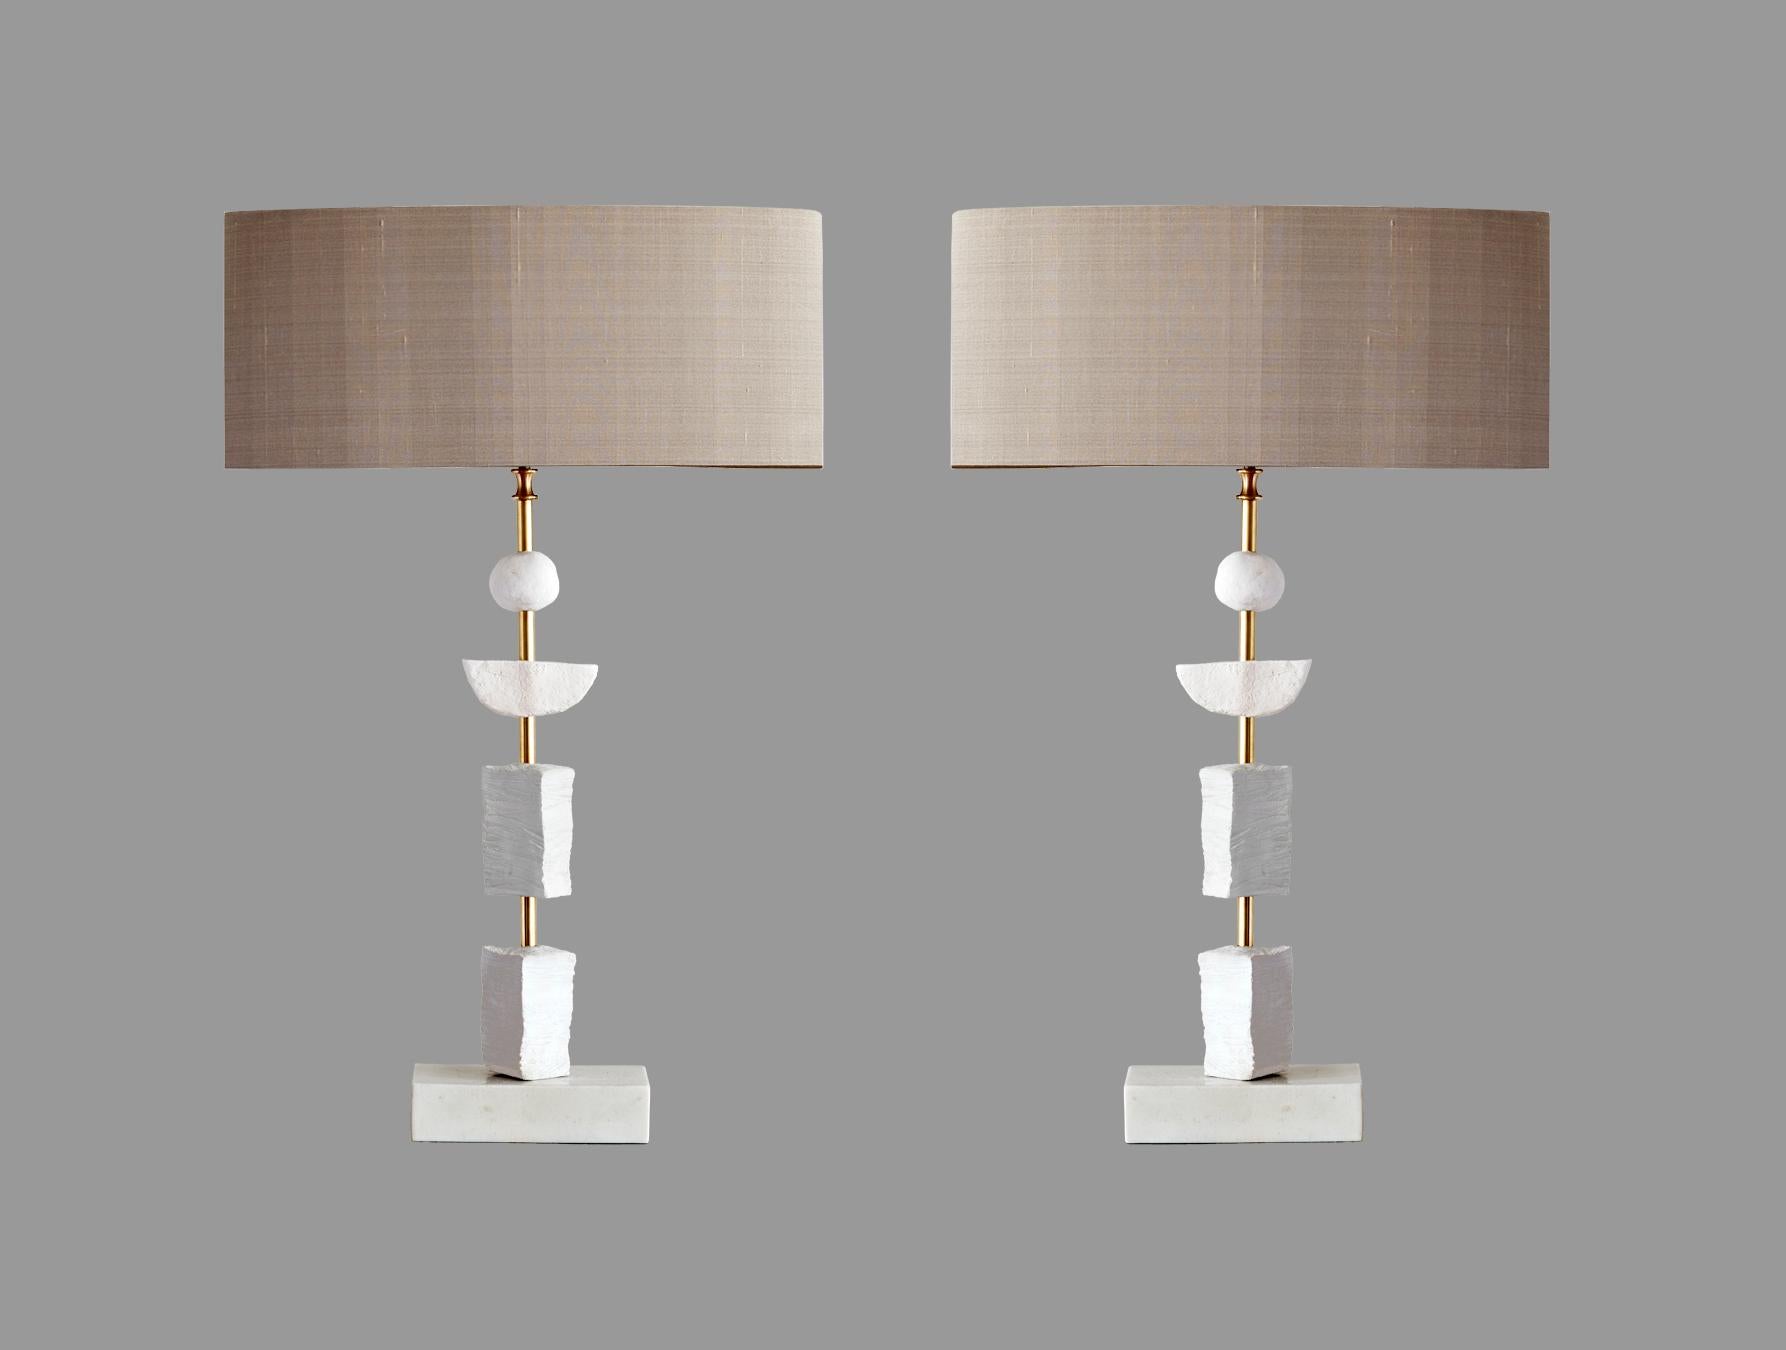 English Pair of Contemporary European Table Lamp Synergy in White by Margit Wittig For Sale